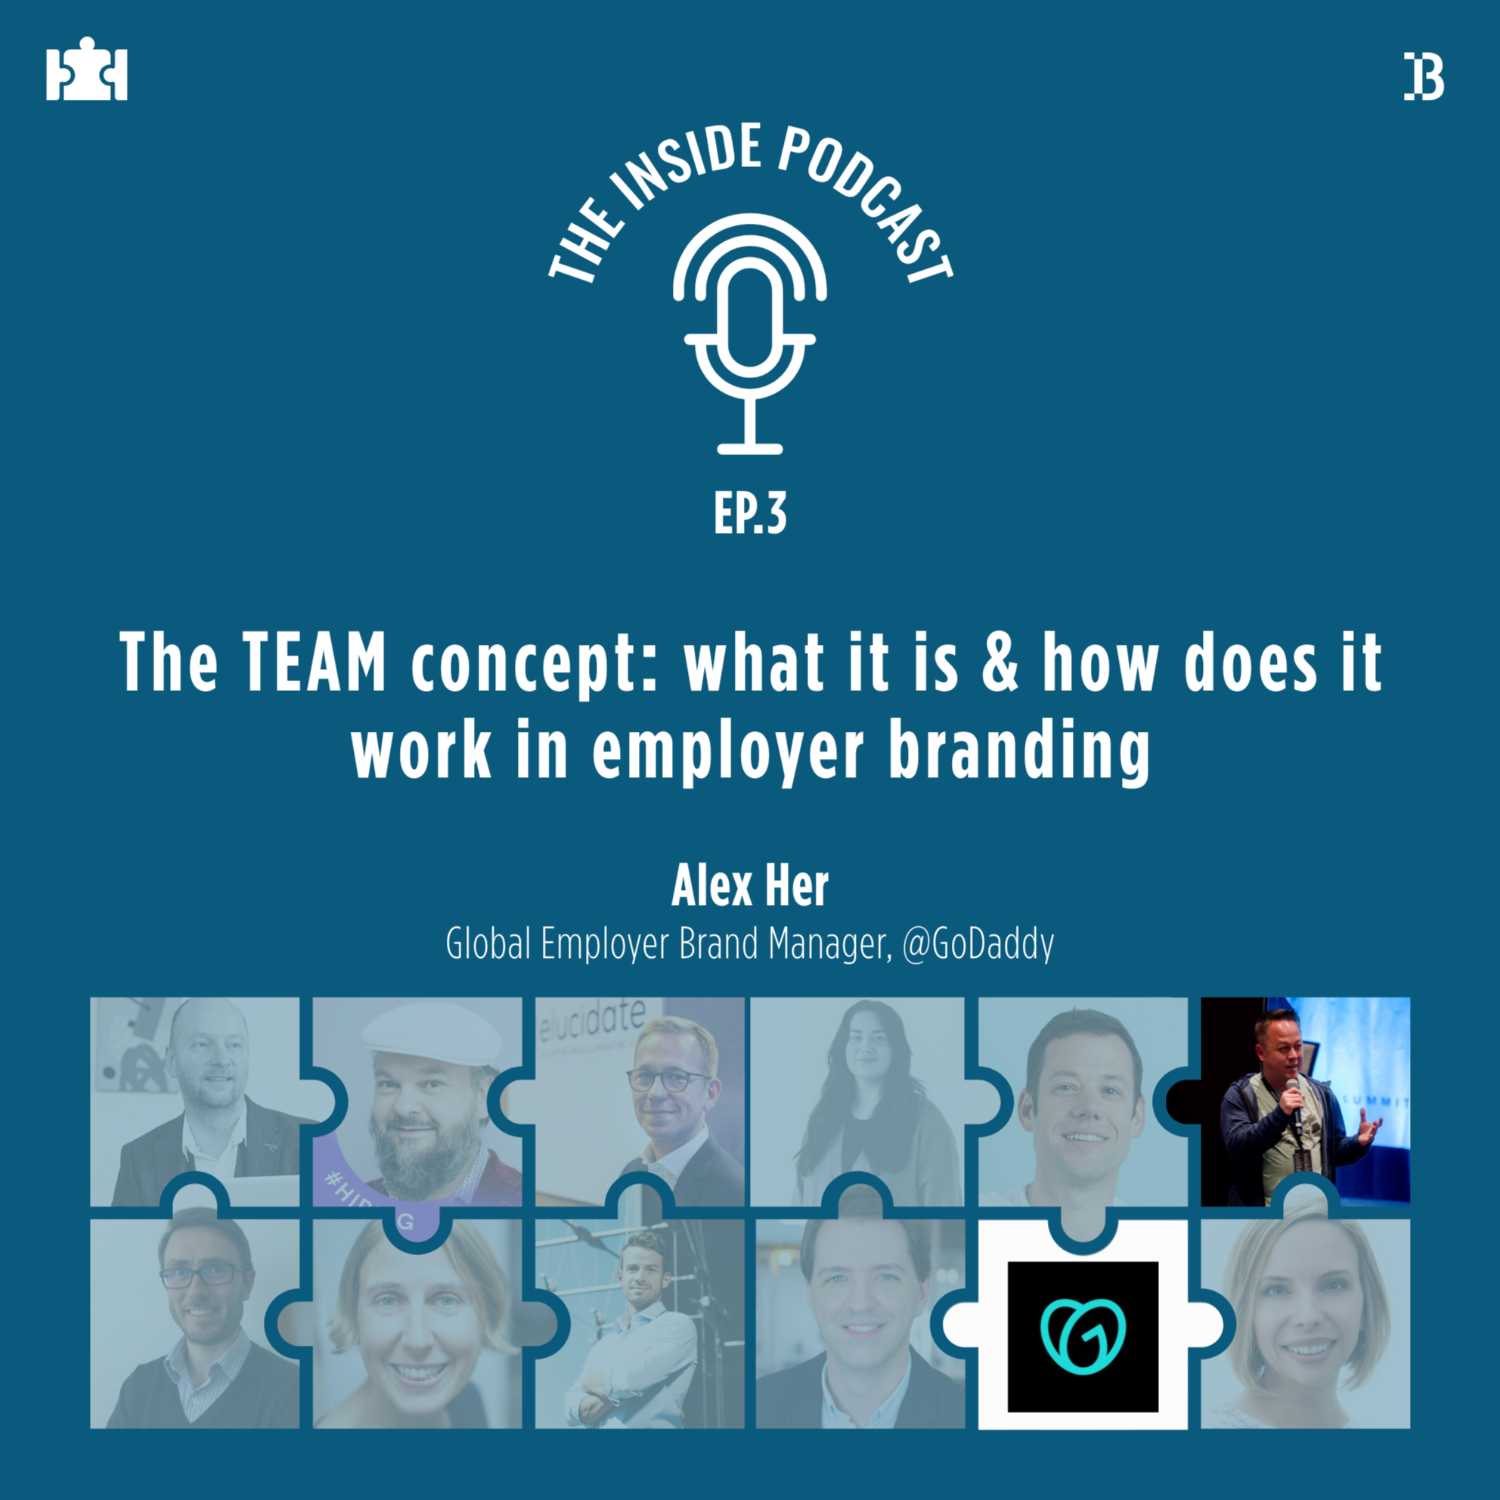 Employer Branding T.I.P S06Ep.3 | “The TEAM concept: what it is & how does it work in employer branding?” with Alex Her, Global Employer Brand Manager, @GoDaddy